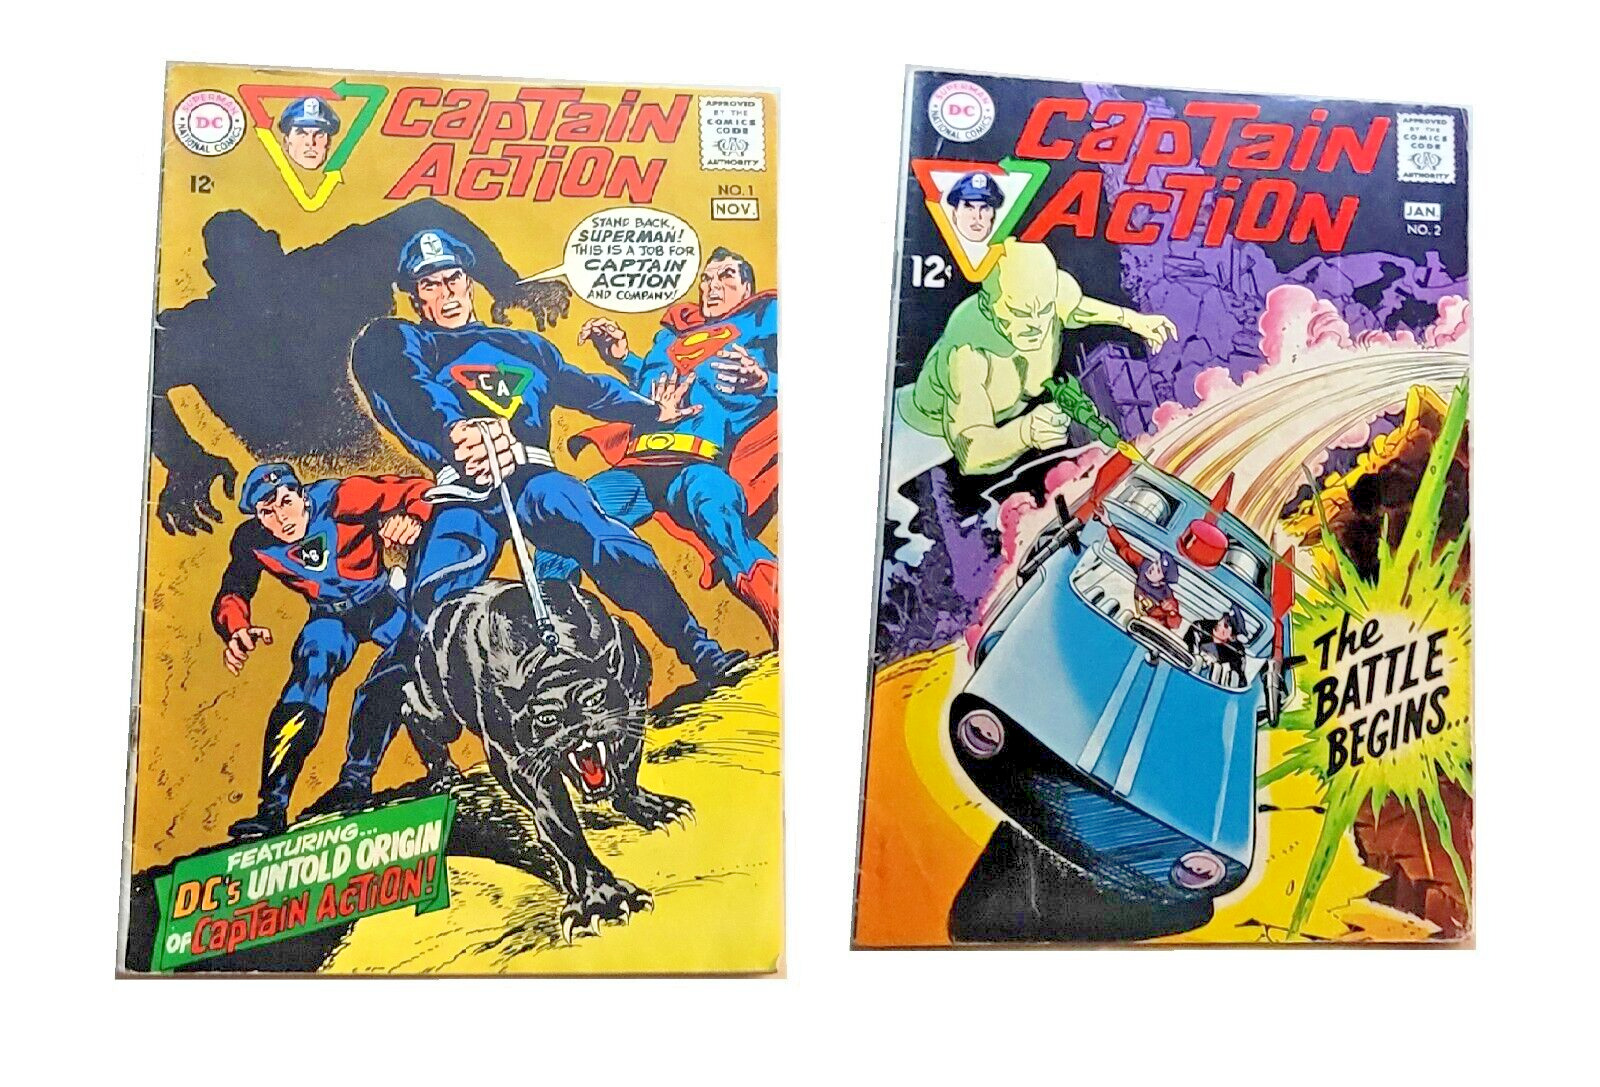 1968 Captain Action Issue #1 and #2 Silver Age Comic Books